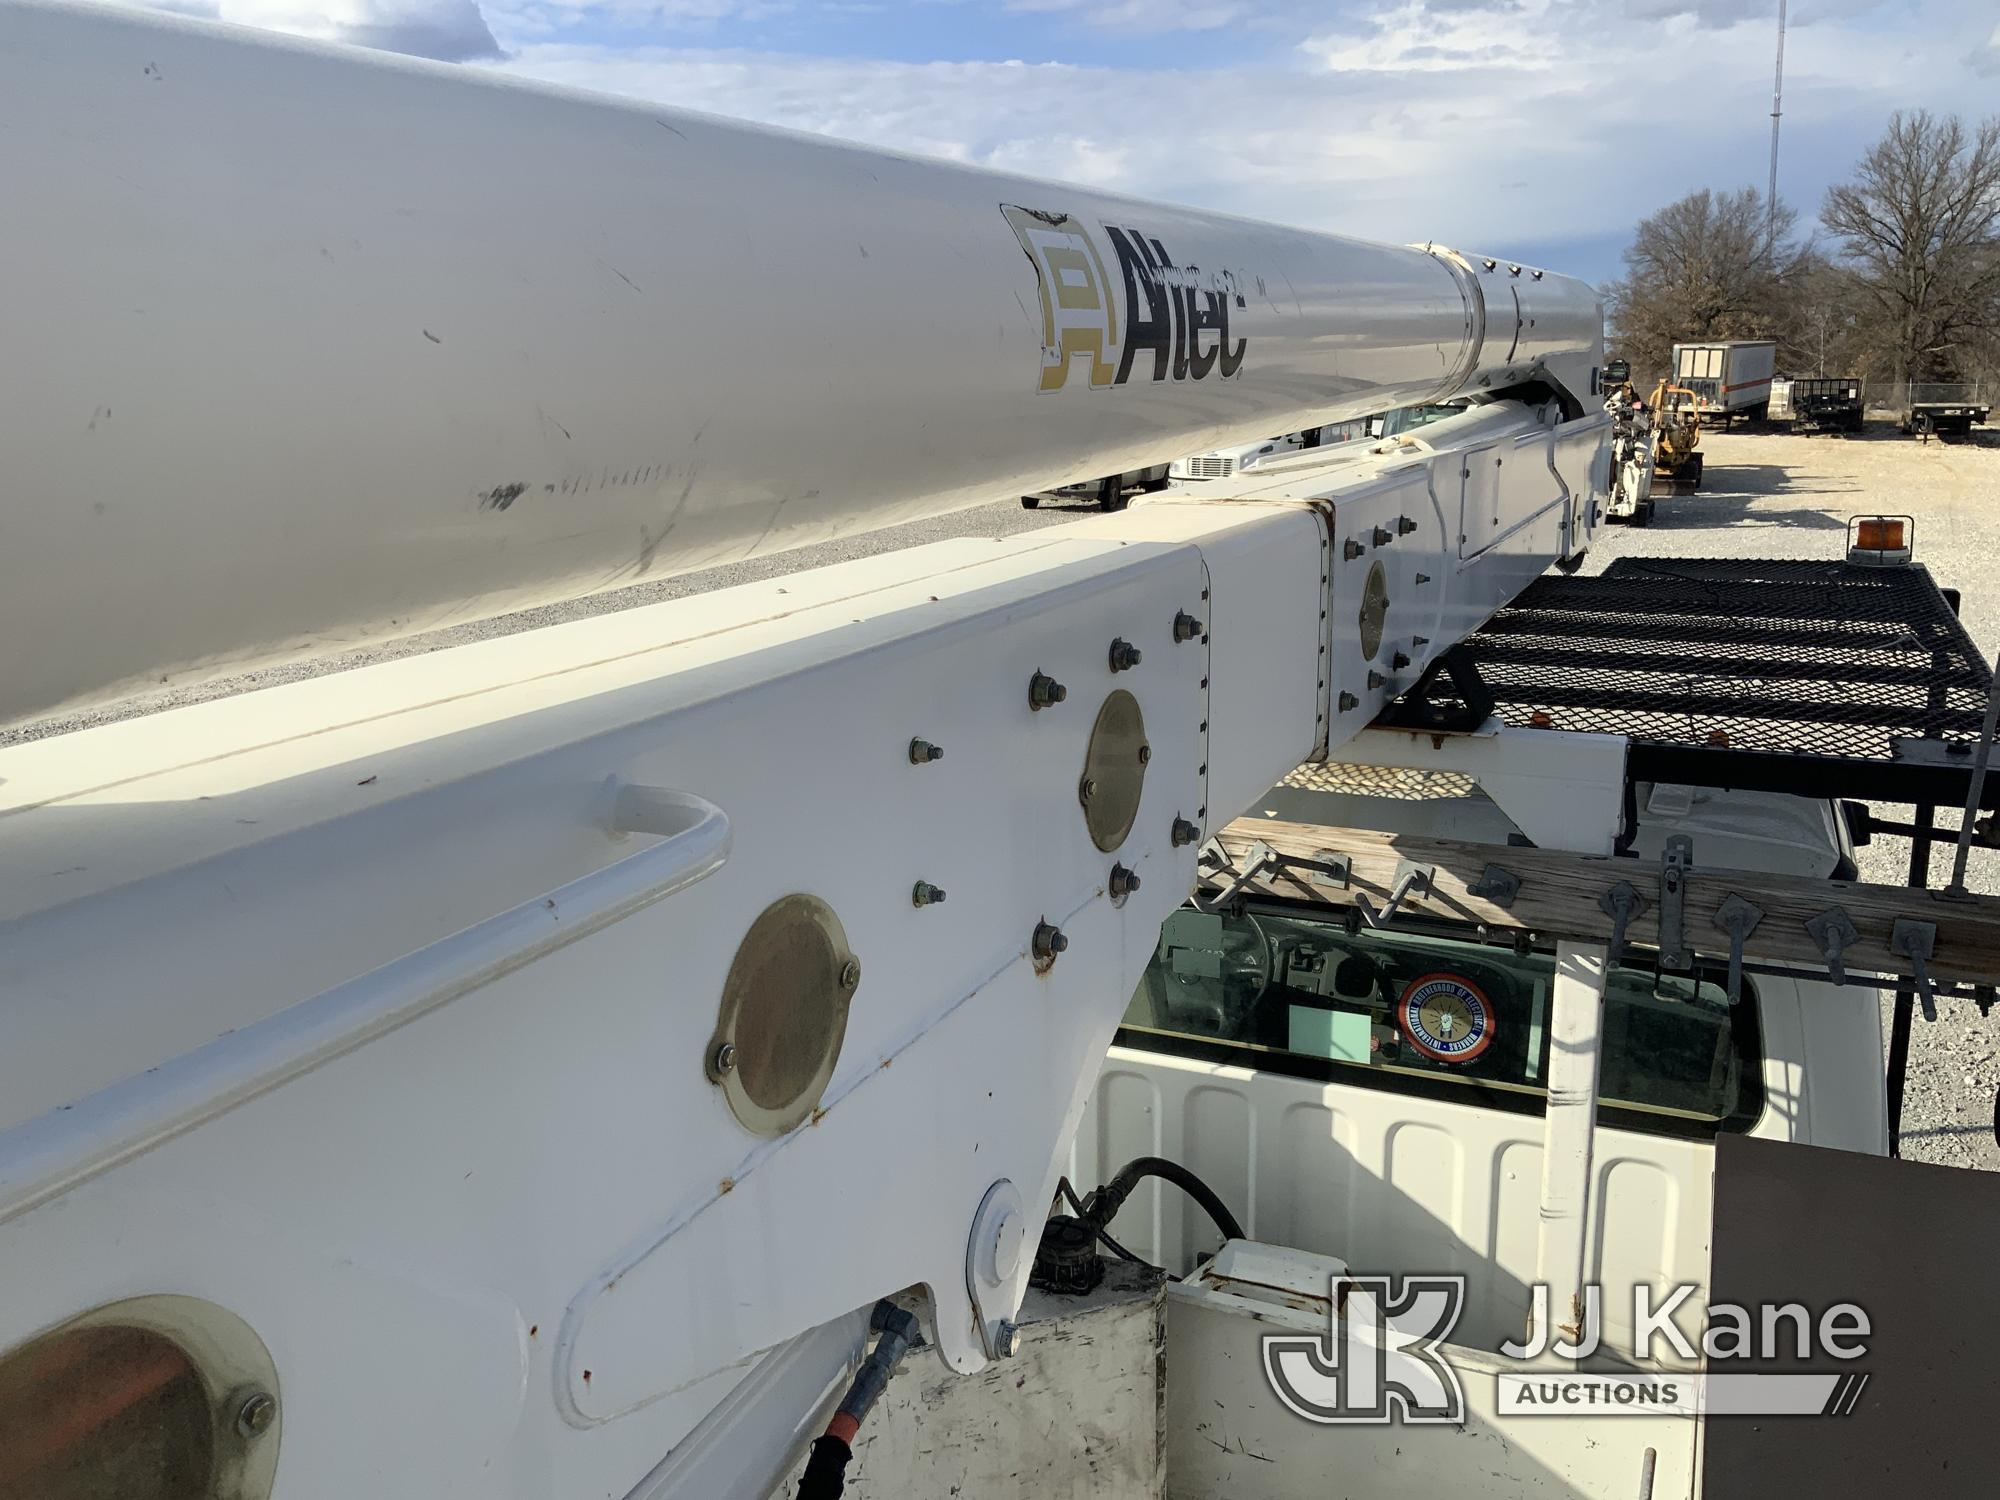 (Hawk Point, MO) Altec AA55-MH, Material Handling Bucket Truck rear mounted on 2015 Freightliner M2